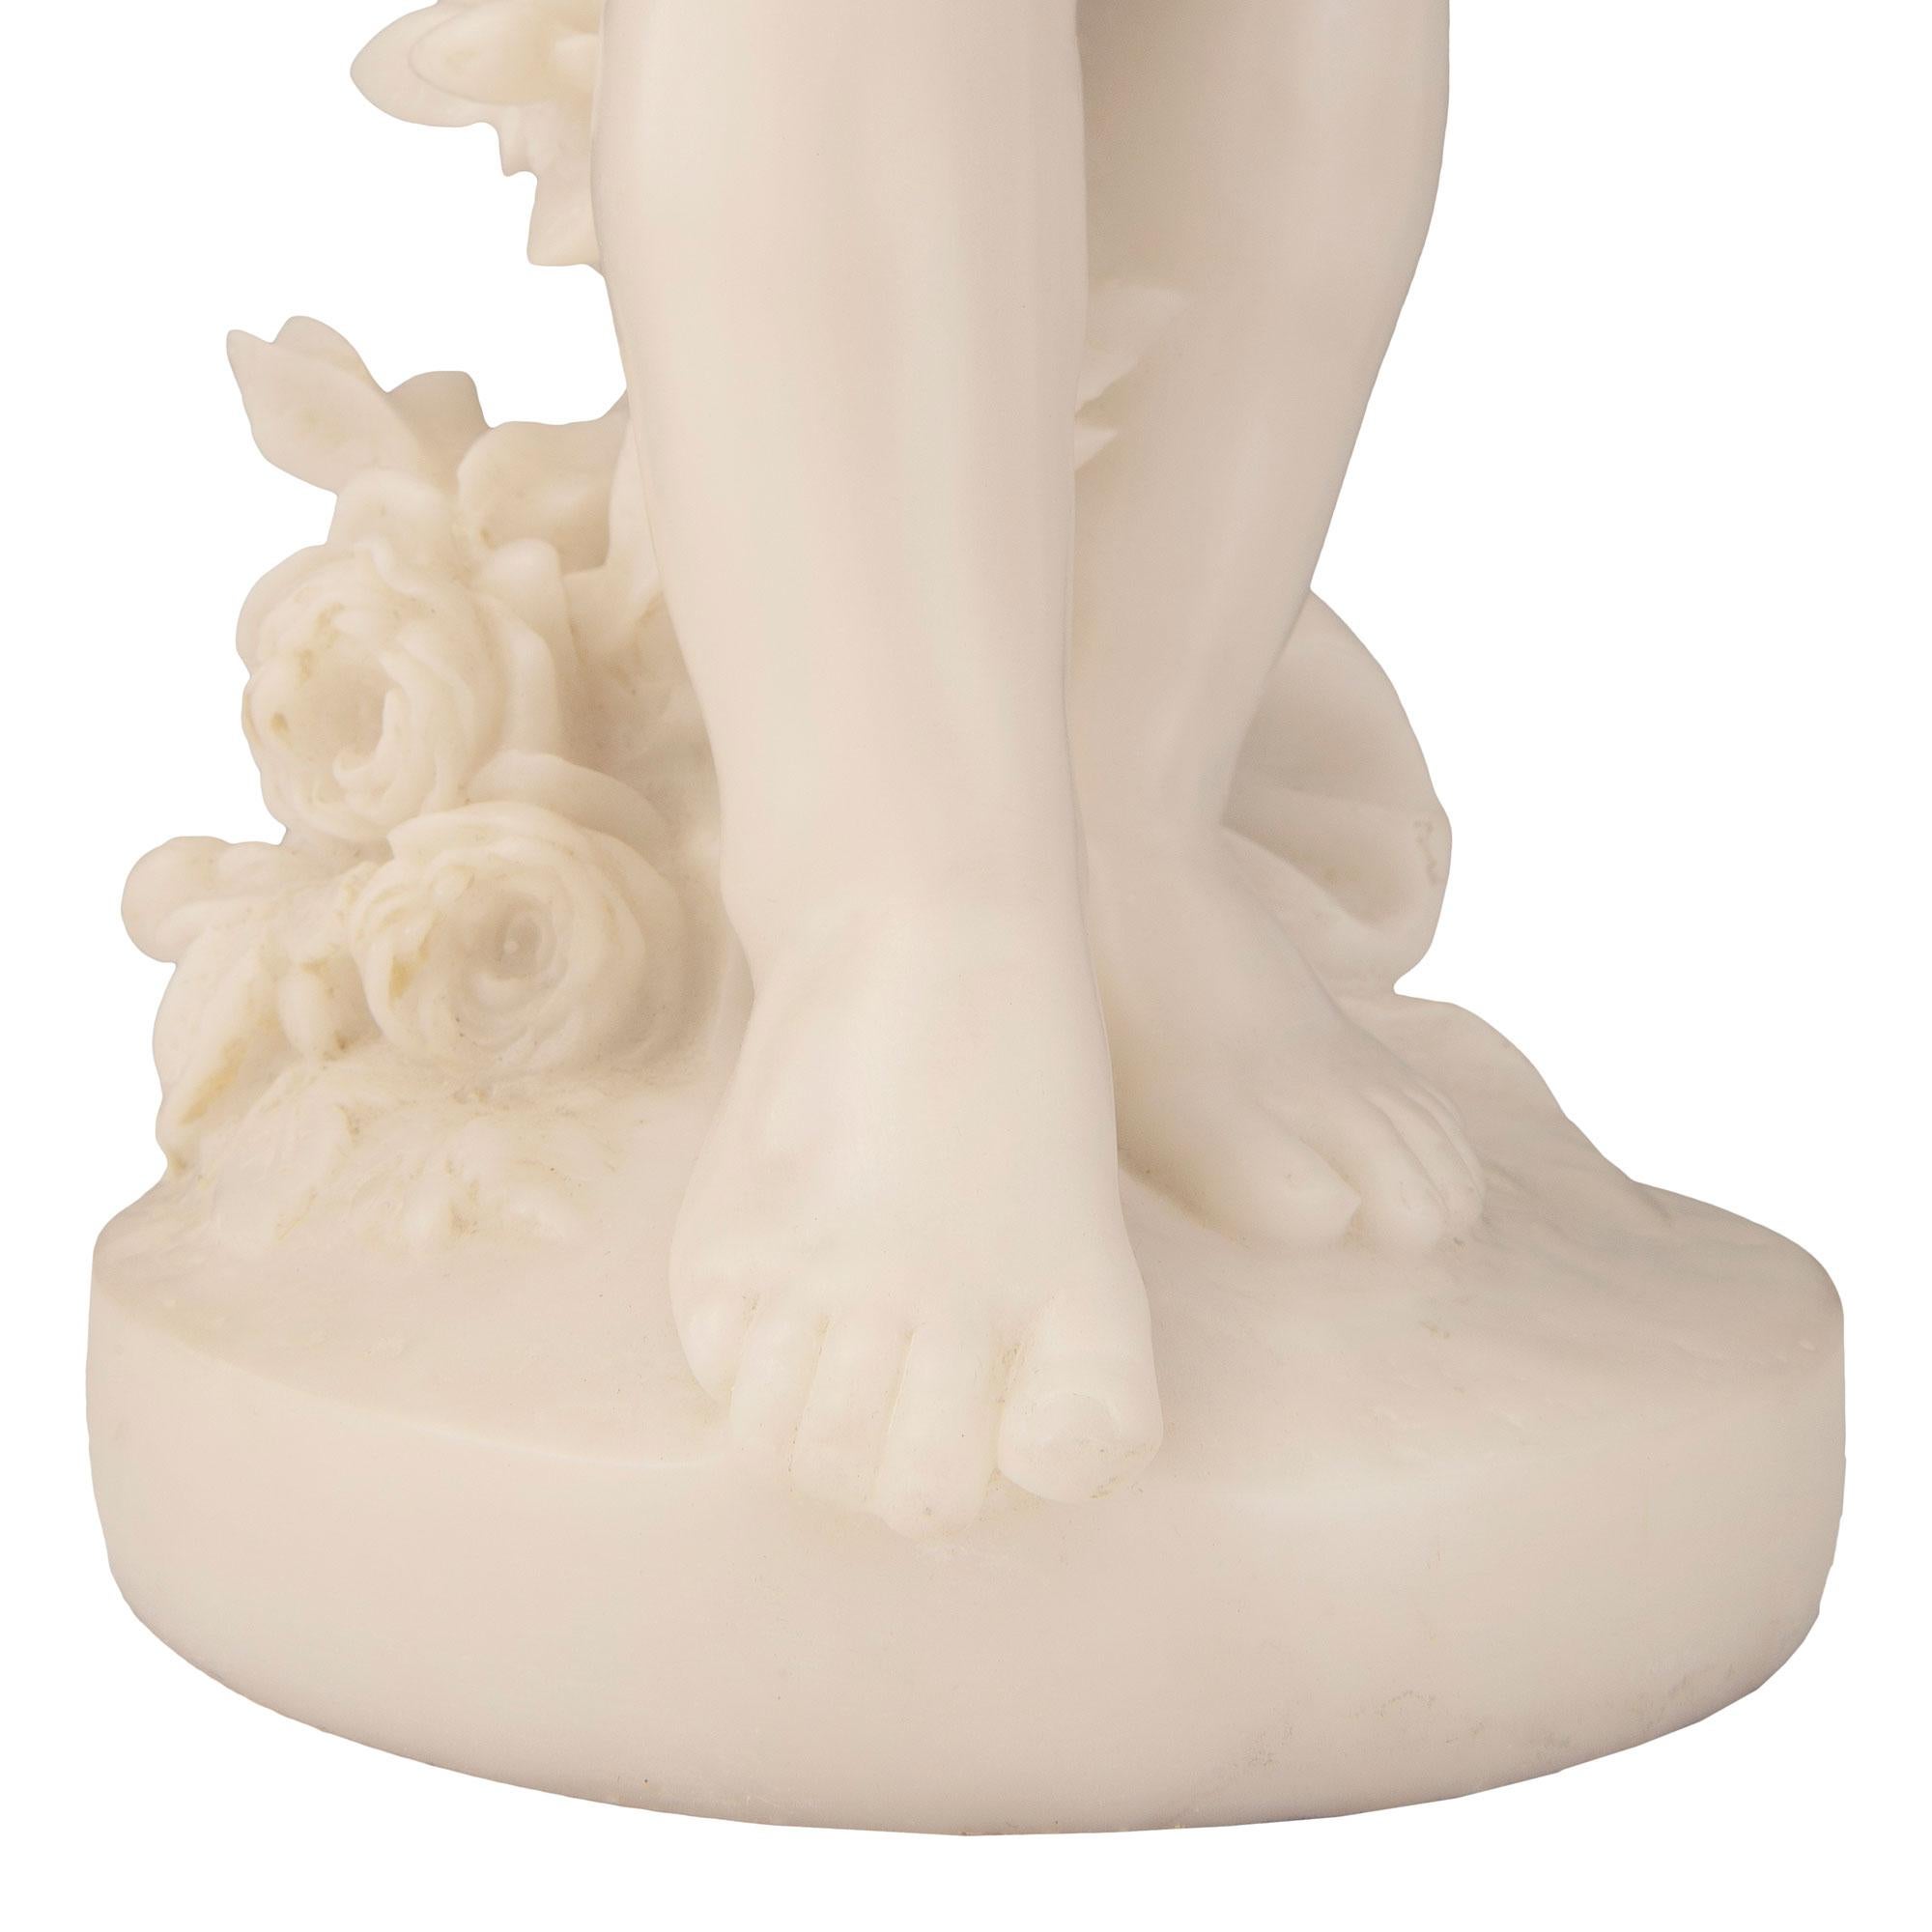 Italian Mid-19th Century White Carrara Marble Statue of Winged Girl For Sale 6